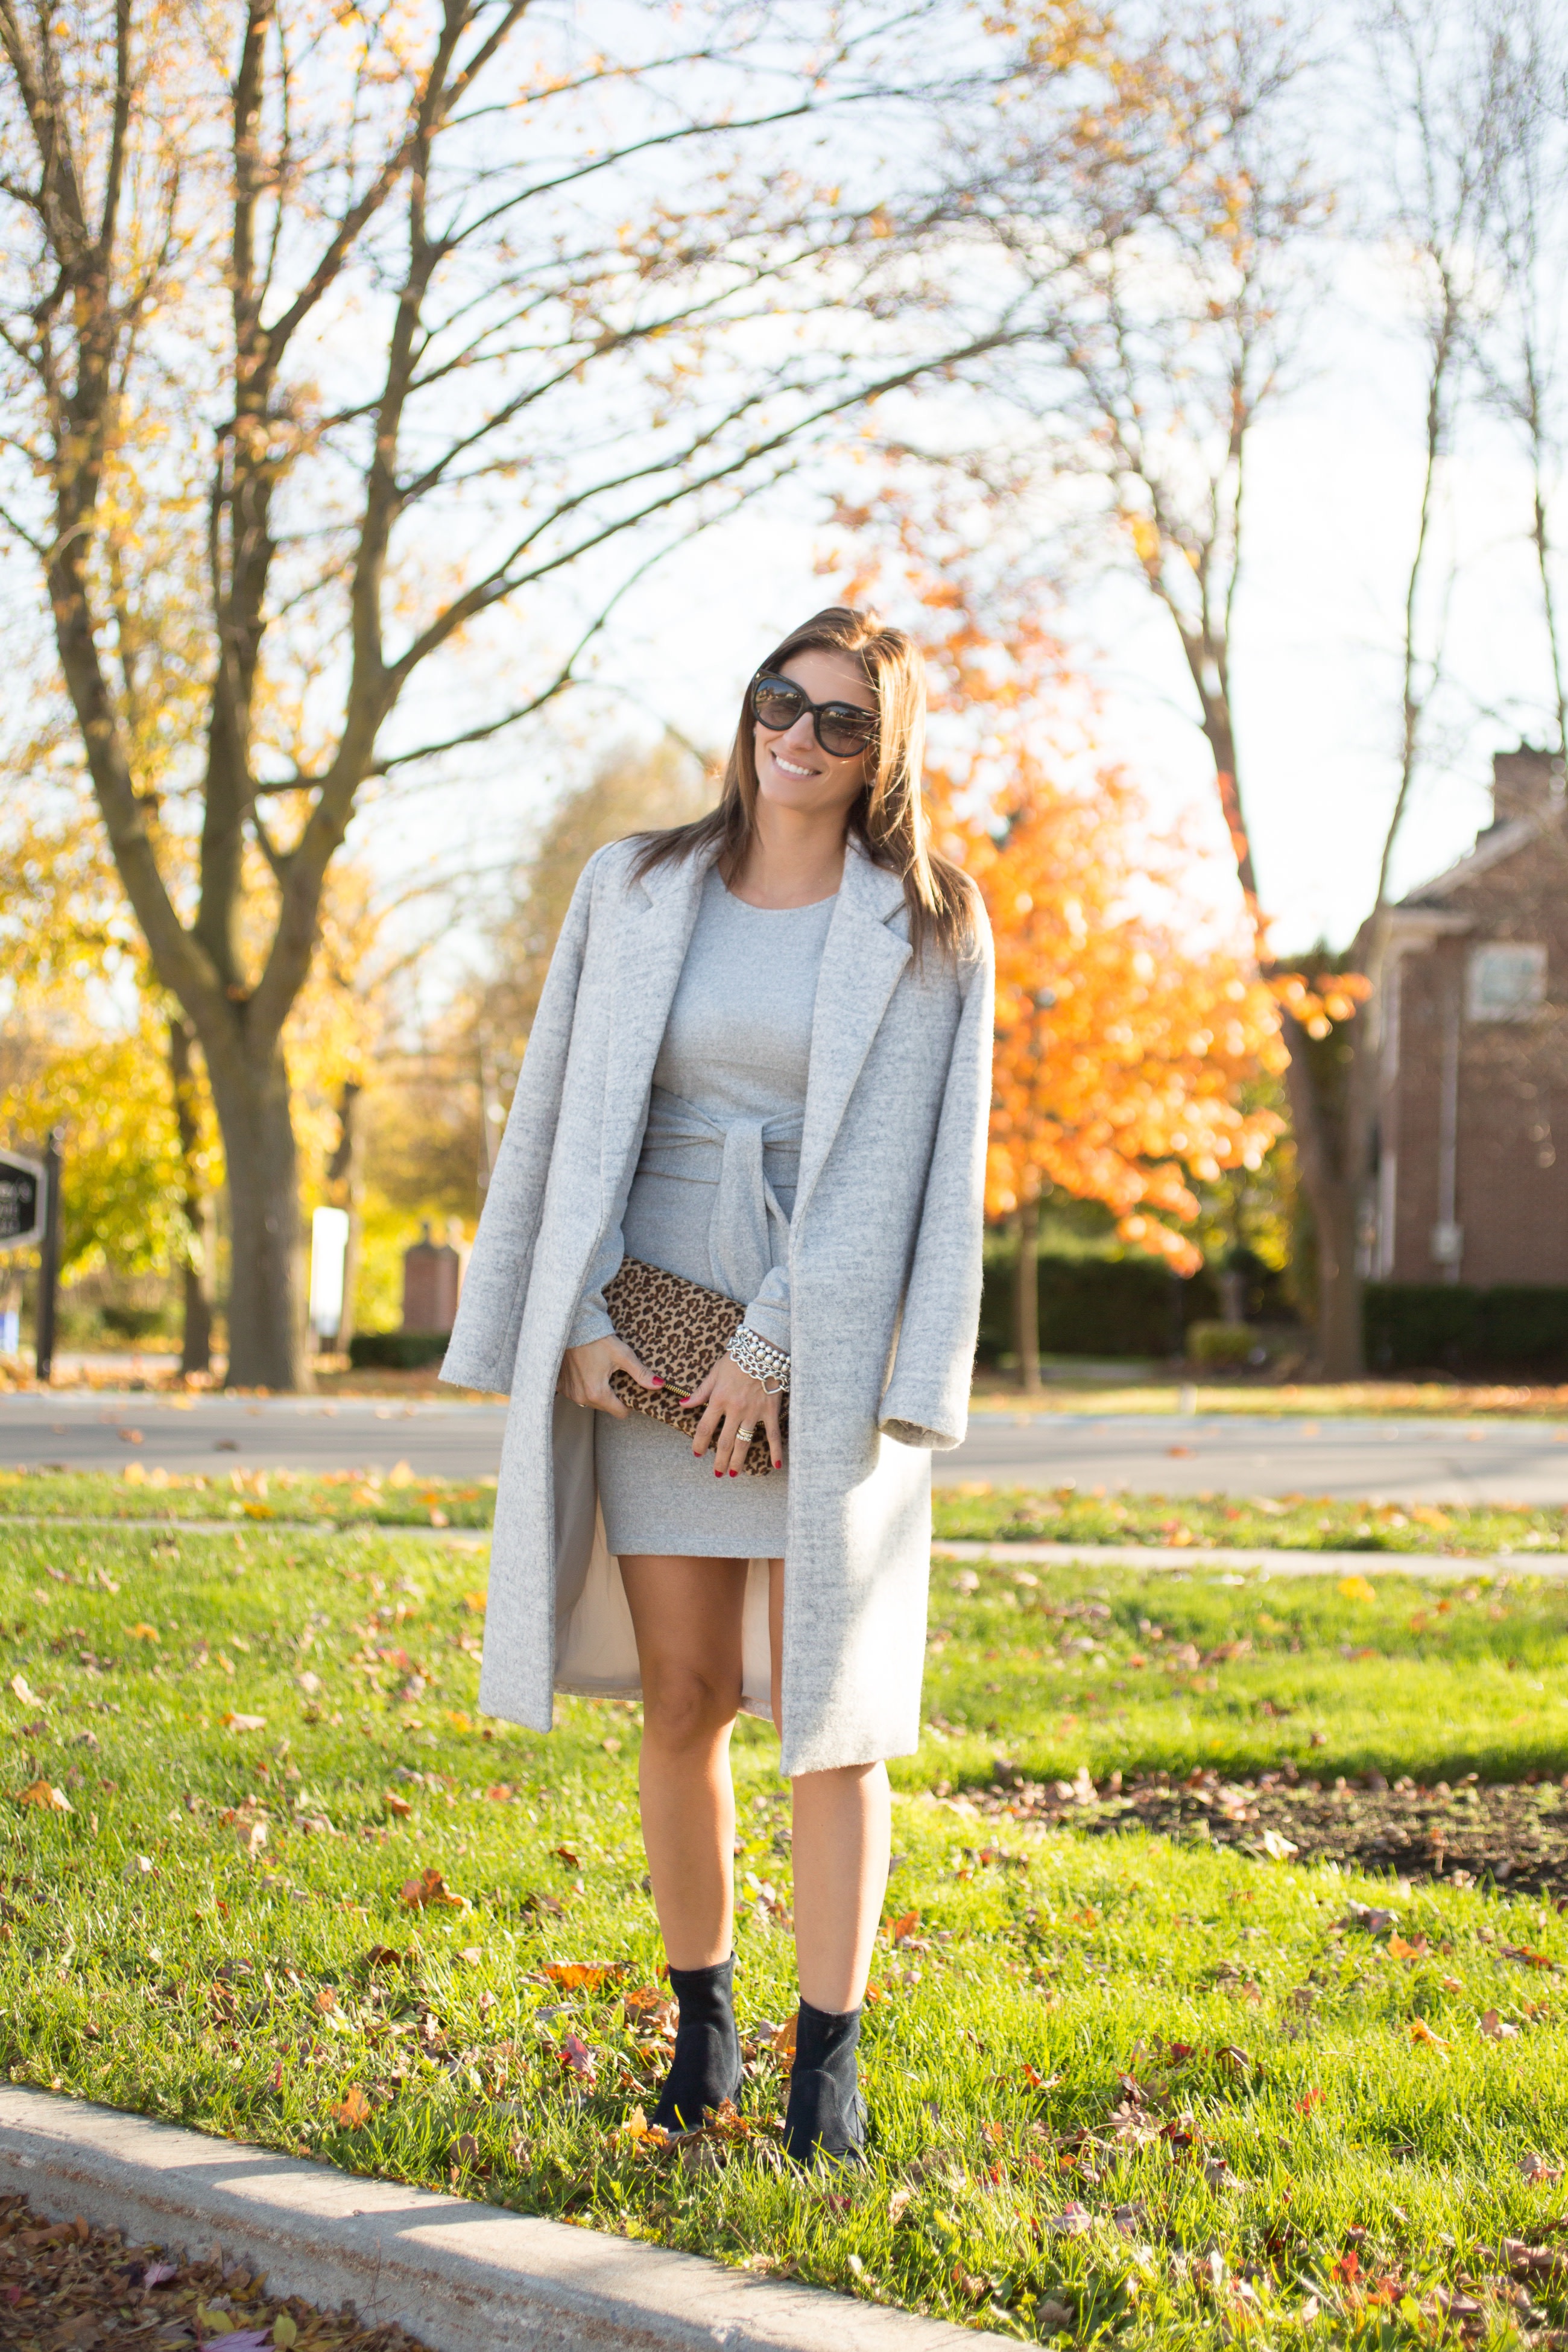 Grey sweater dress from Dynamite, grey long coat, leopard bag, black pointed toe sock boots